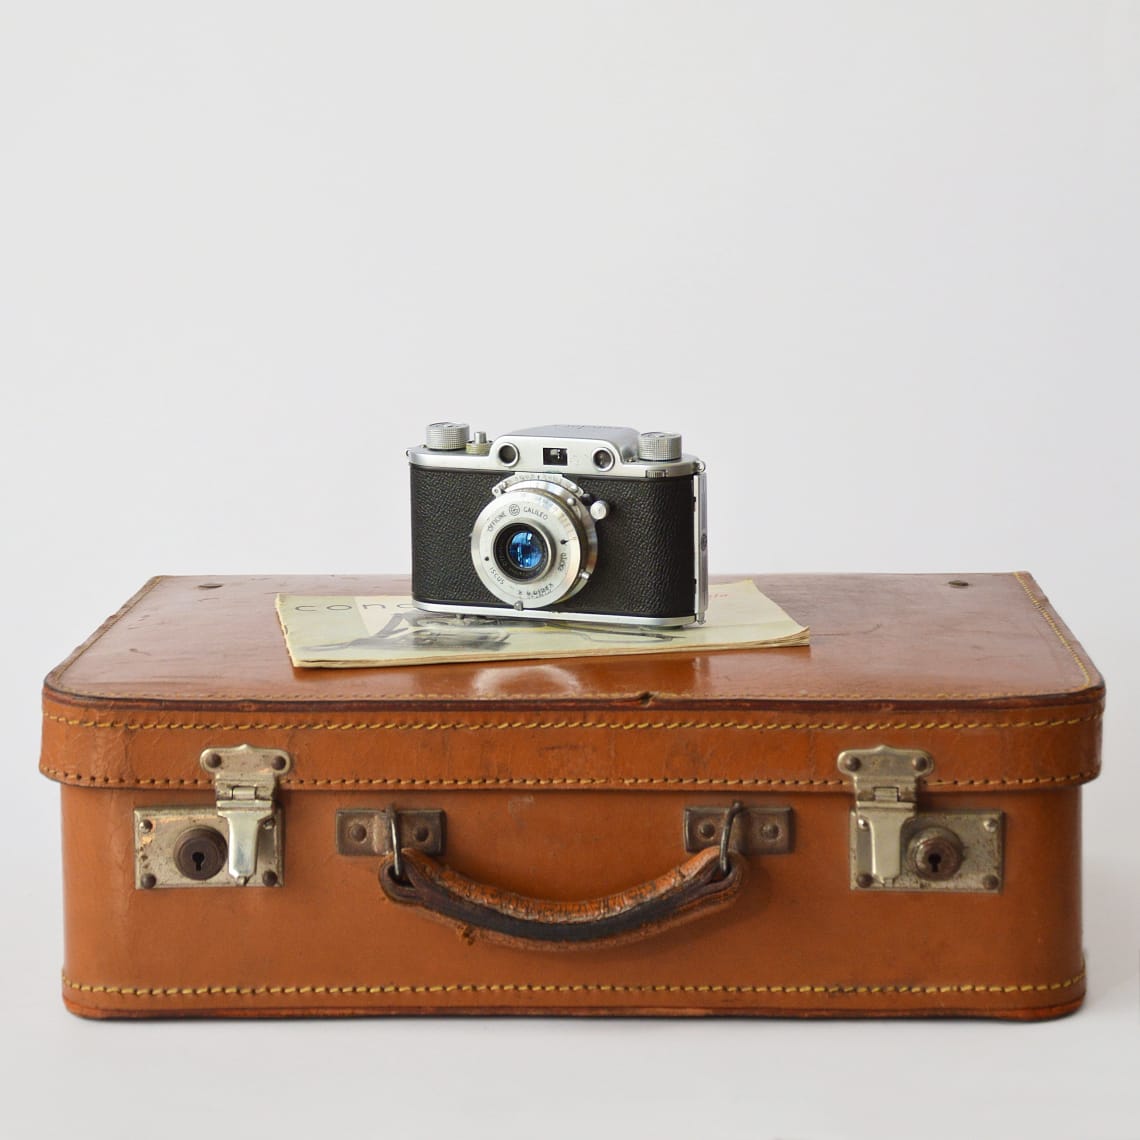 Vintage suitcase and camera